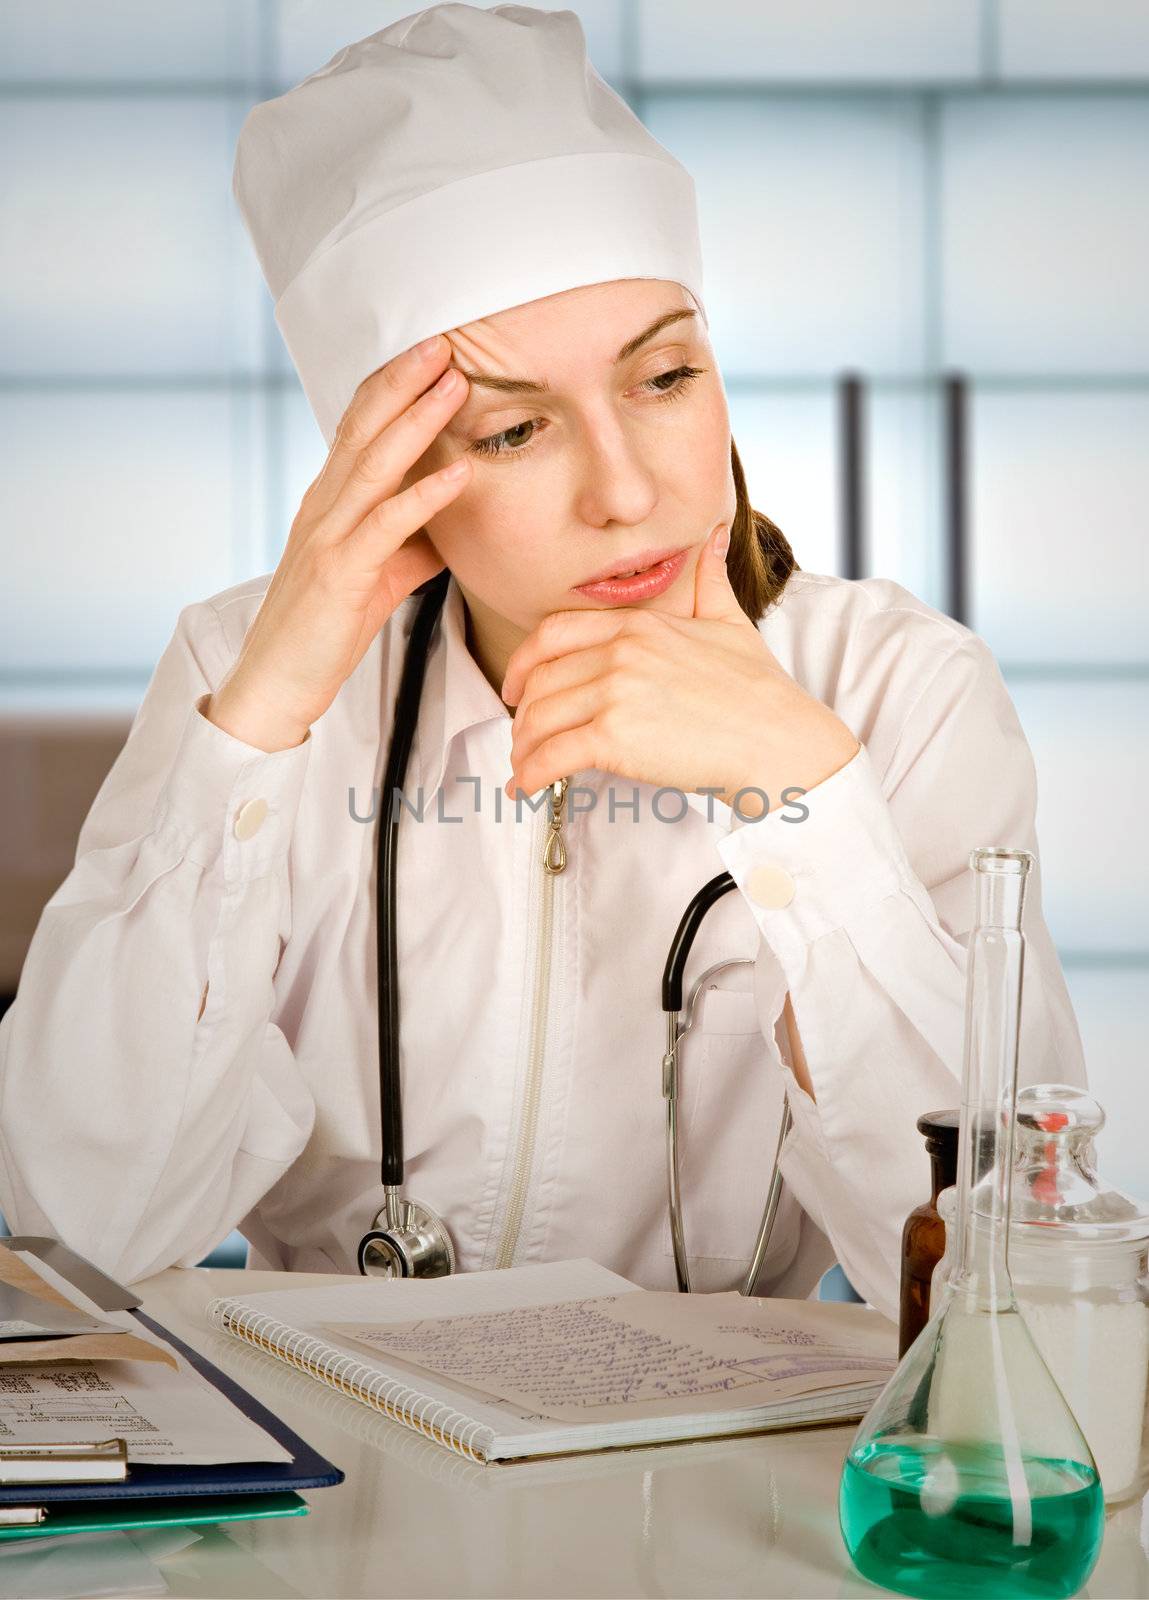 Portrait of the tired woman-therapist in a white uniform with a stethoscope, sitting near a table with records and medicines
